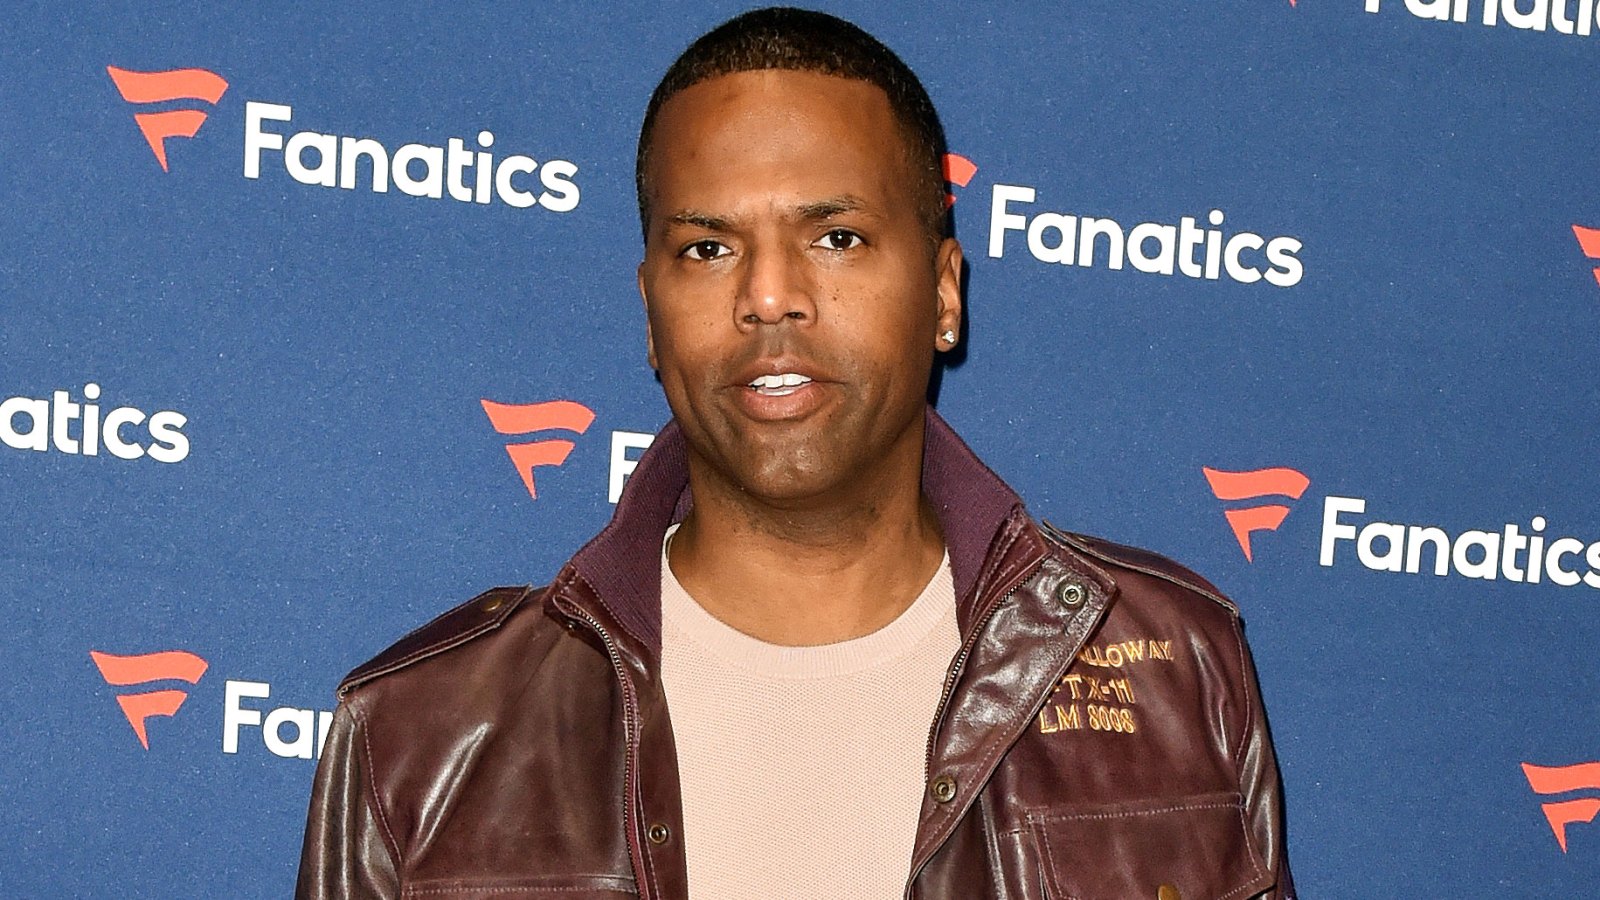 Extra’ Host A.J. Calloway Suspended Amid Sexual Misconduct Allegatons